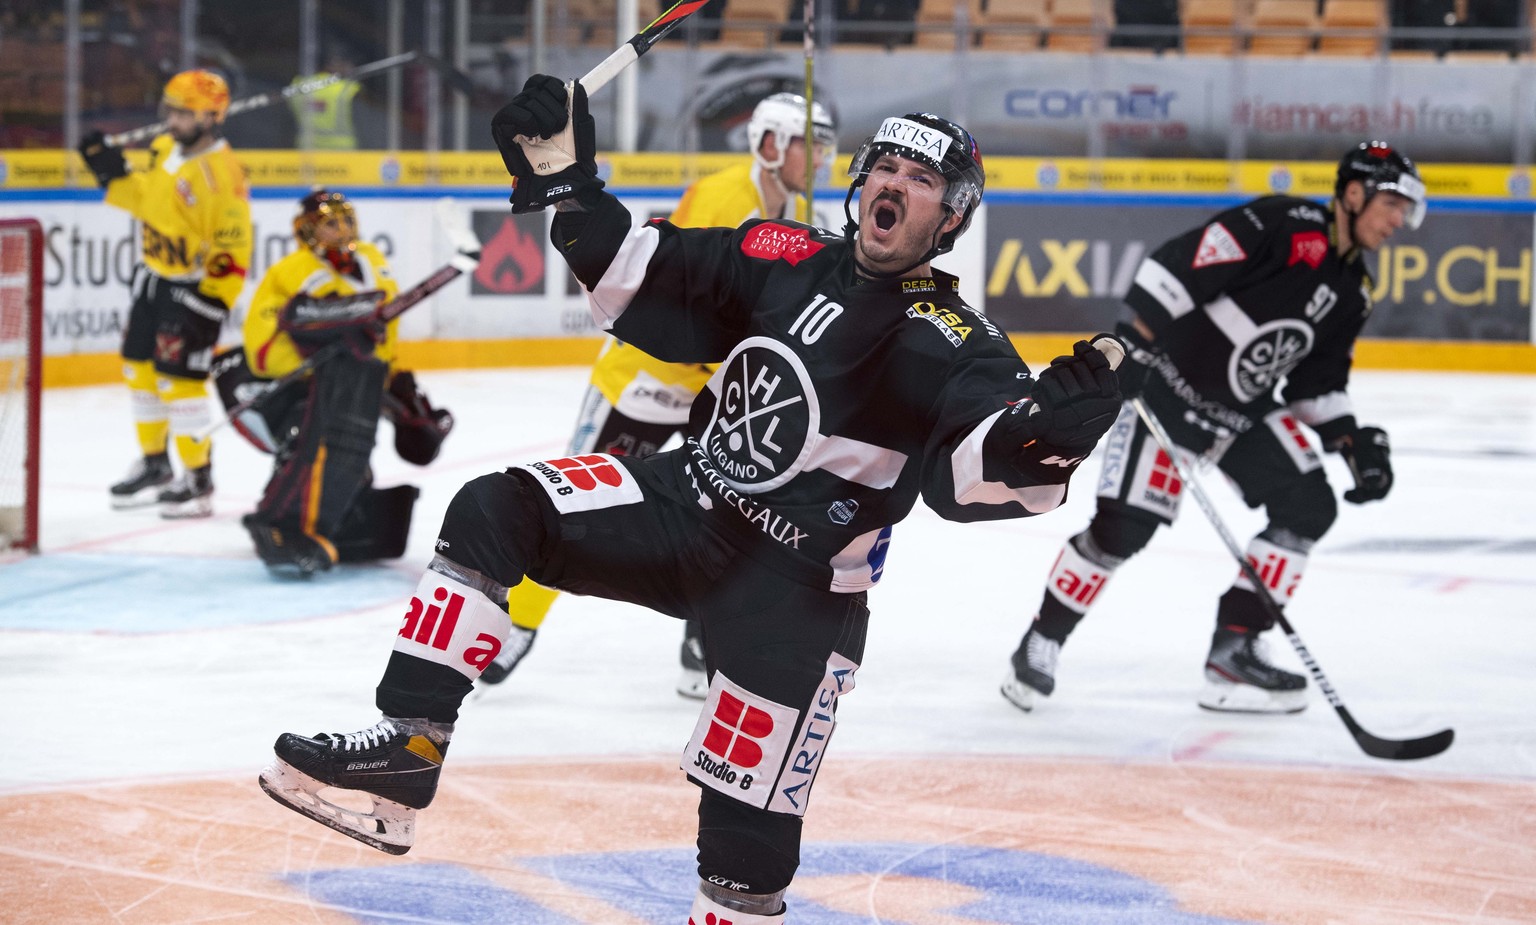 Lugano's player Alessio Bertaggia celebrate the score 2-1 during the preliminary round game of National League A (NLA) Swiss Championship 2021/22 between HC Lugano and SC Bern at the ice stadium Corne ...